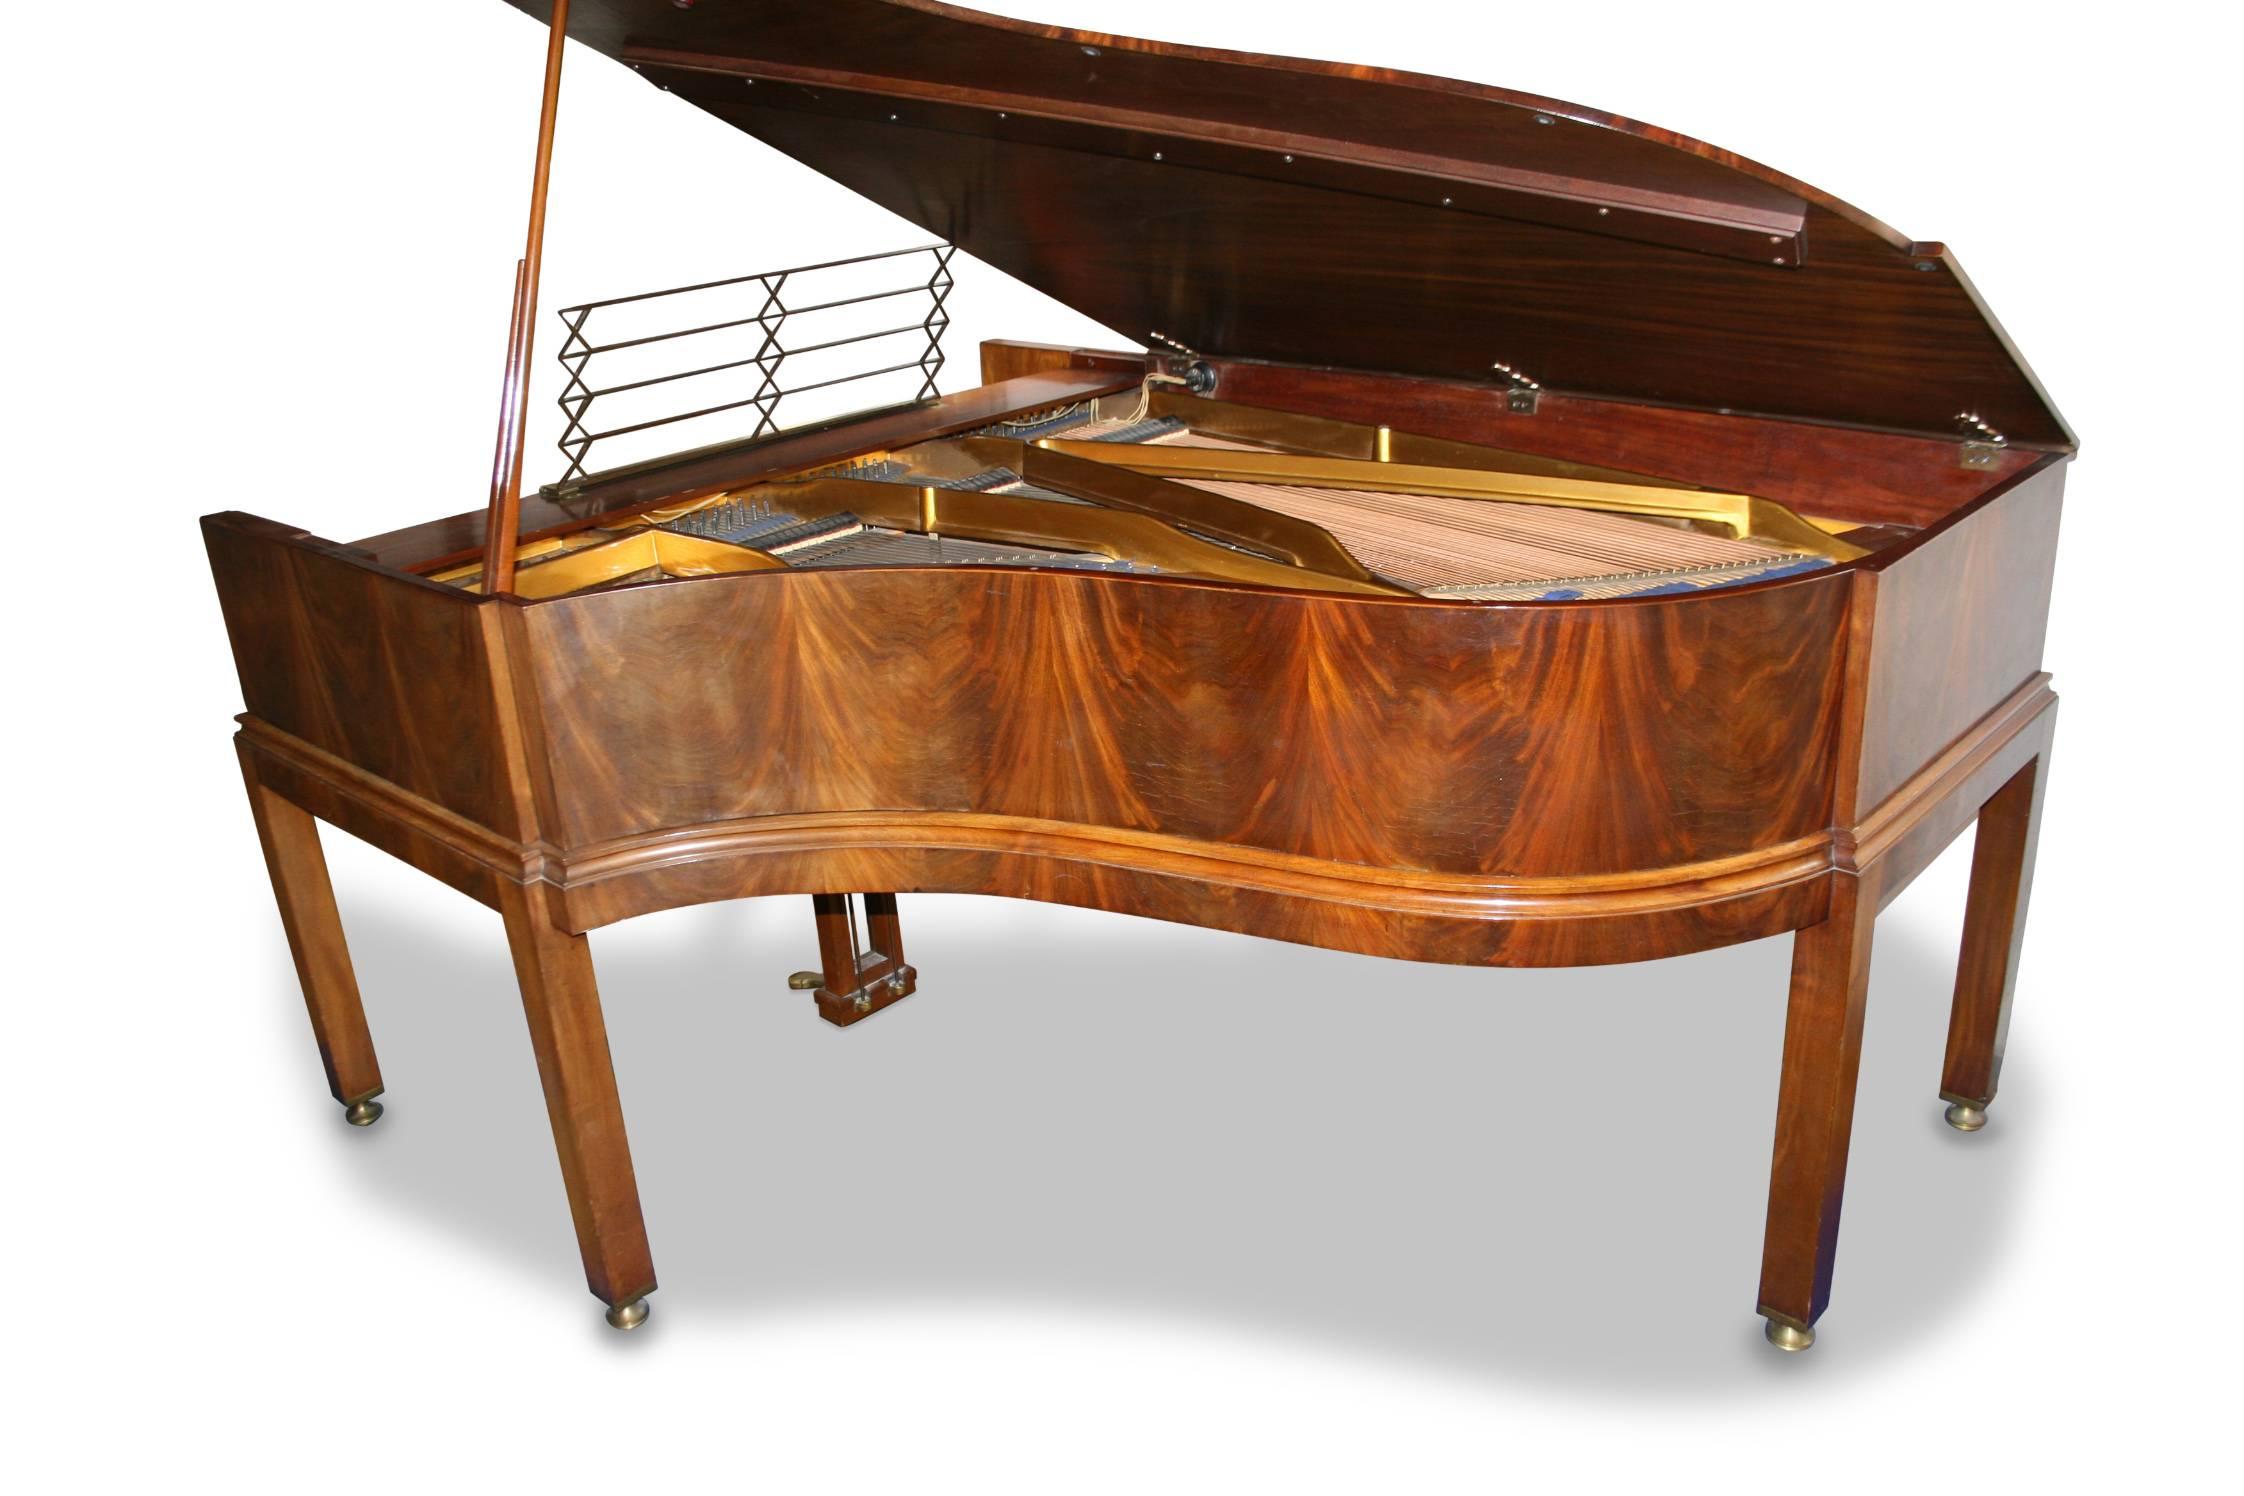 Early 20th Century Architect Designed Grand Piano by Denmark's Leading Piano Maker Dated 1929